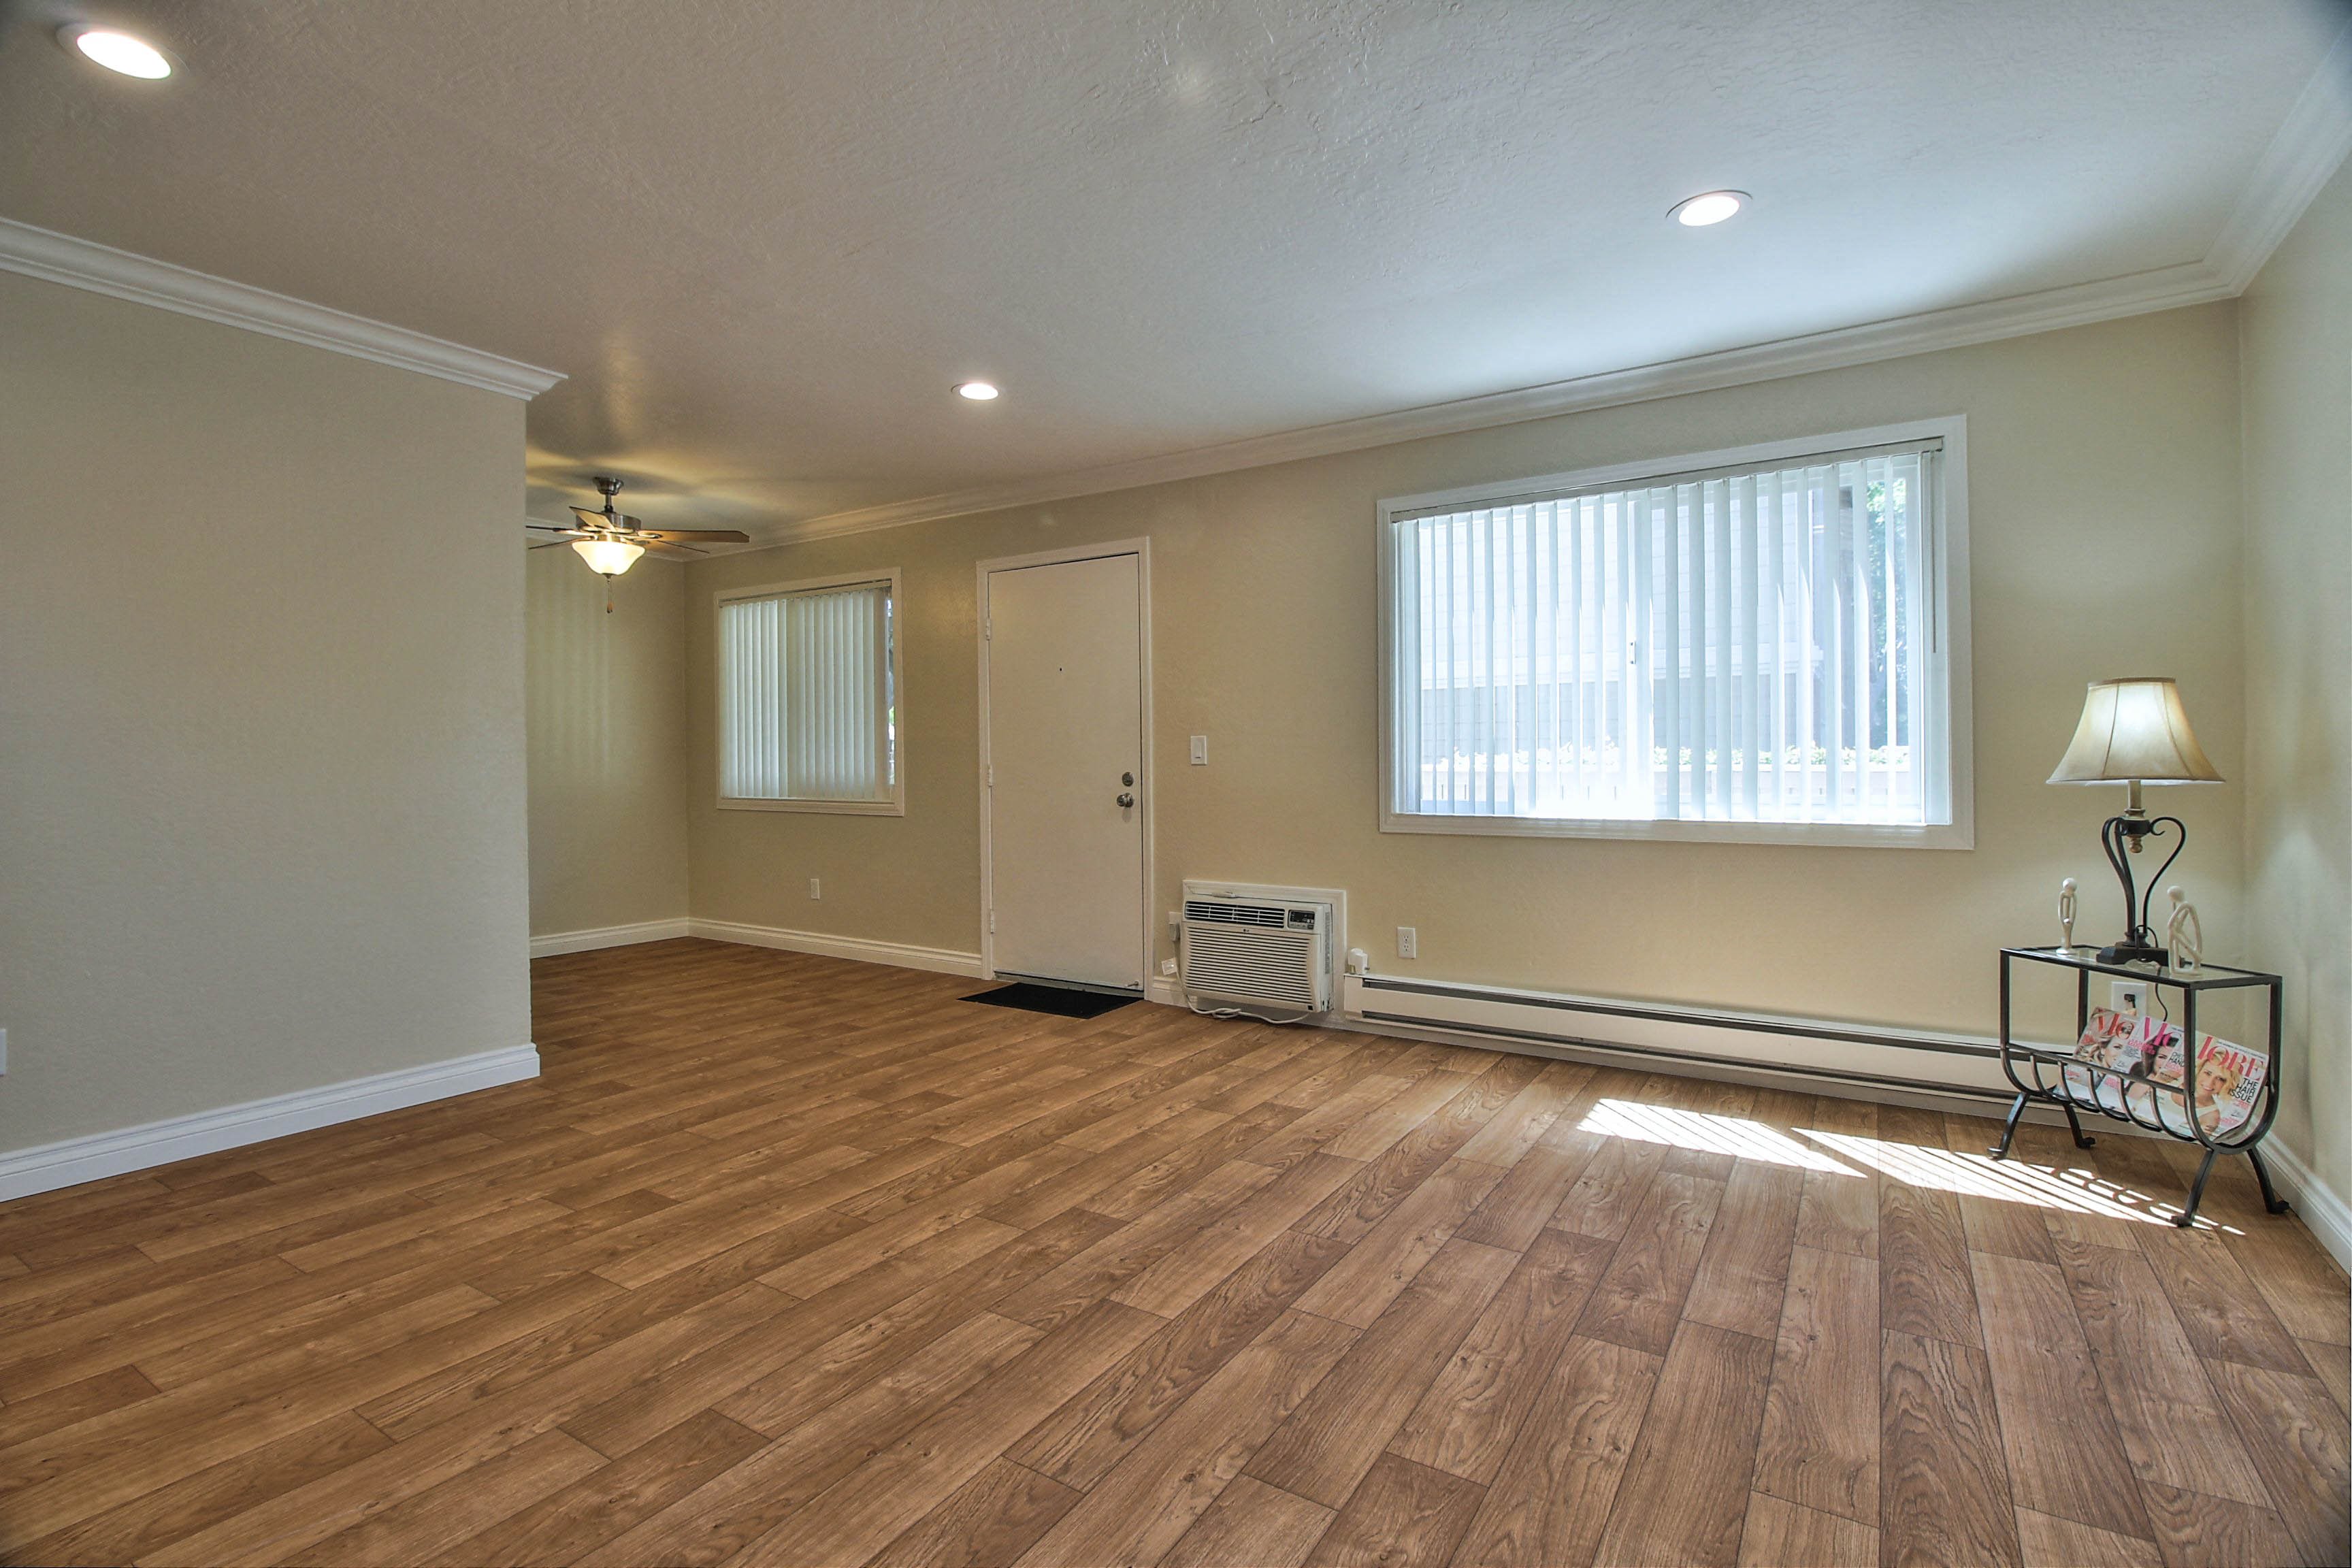 Simple Apartments In Sunnyvale Near Caltrain Station with Modern Garage